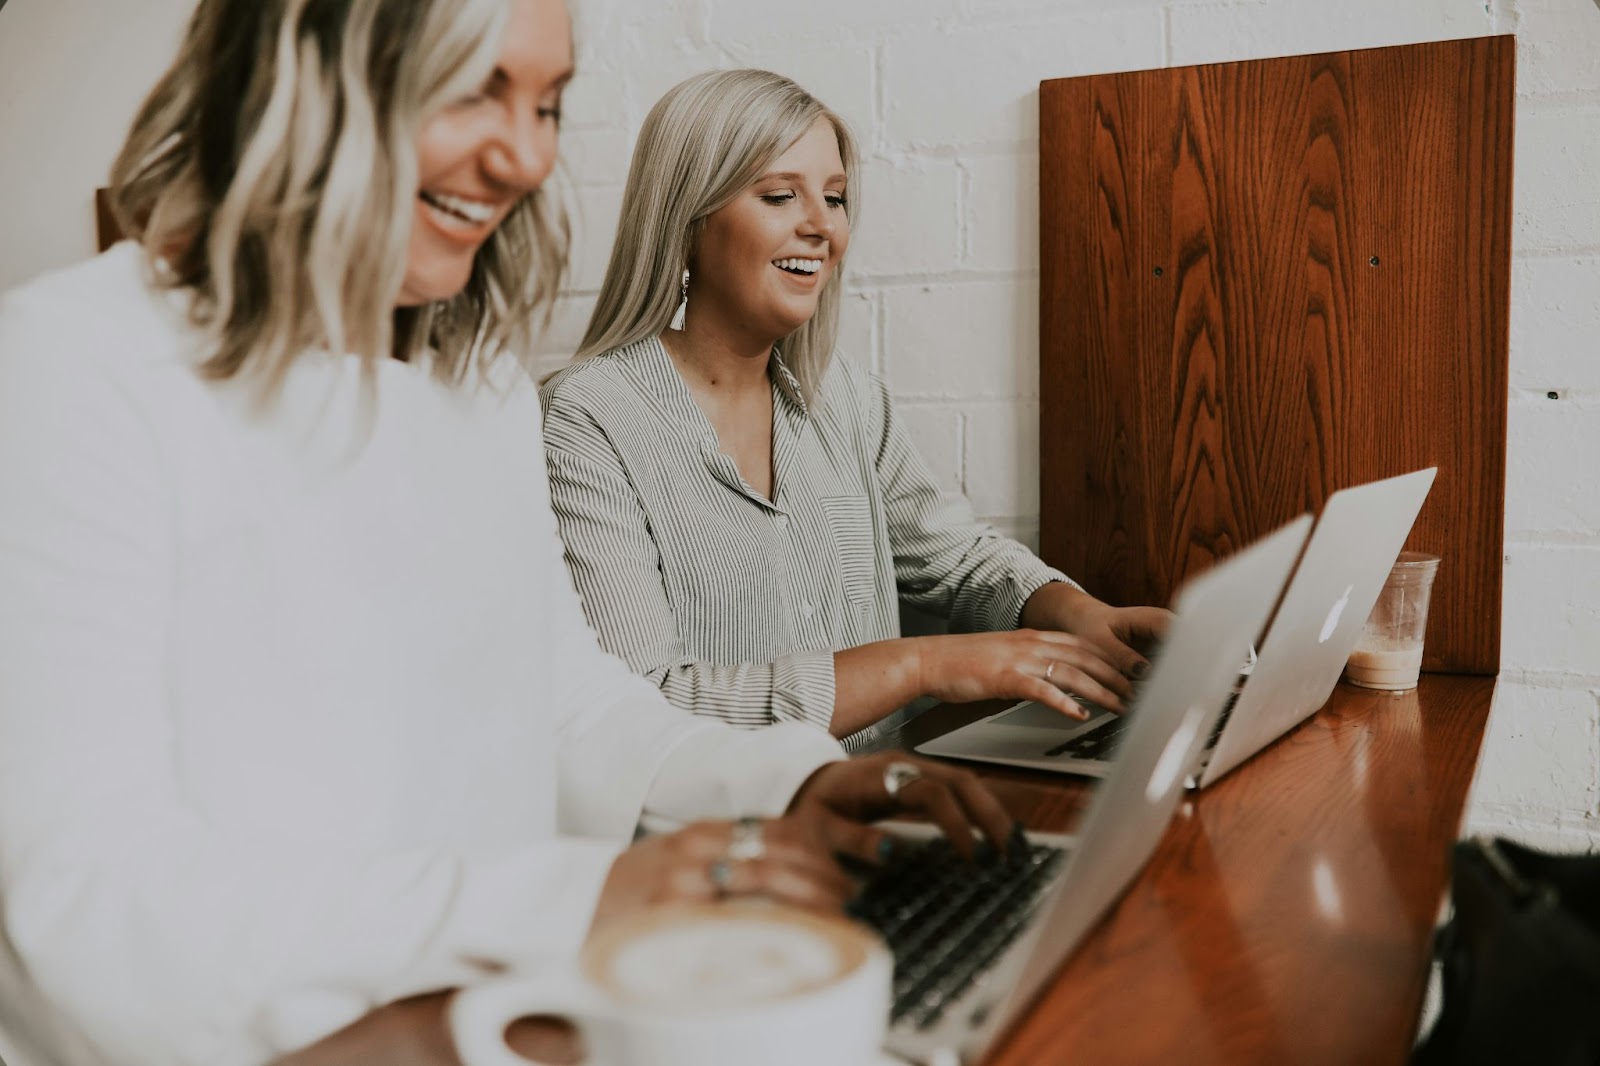 Two laughing women working on laptops developing their careers in HR